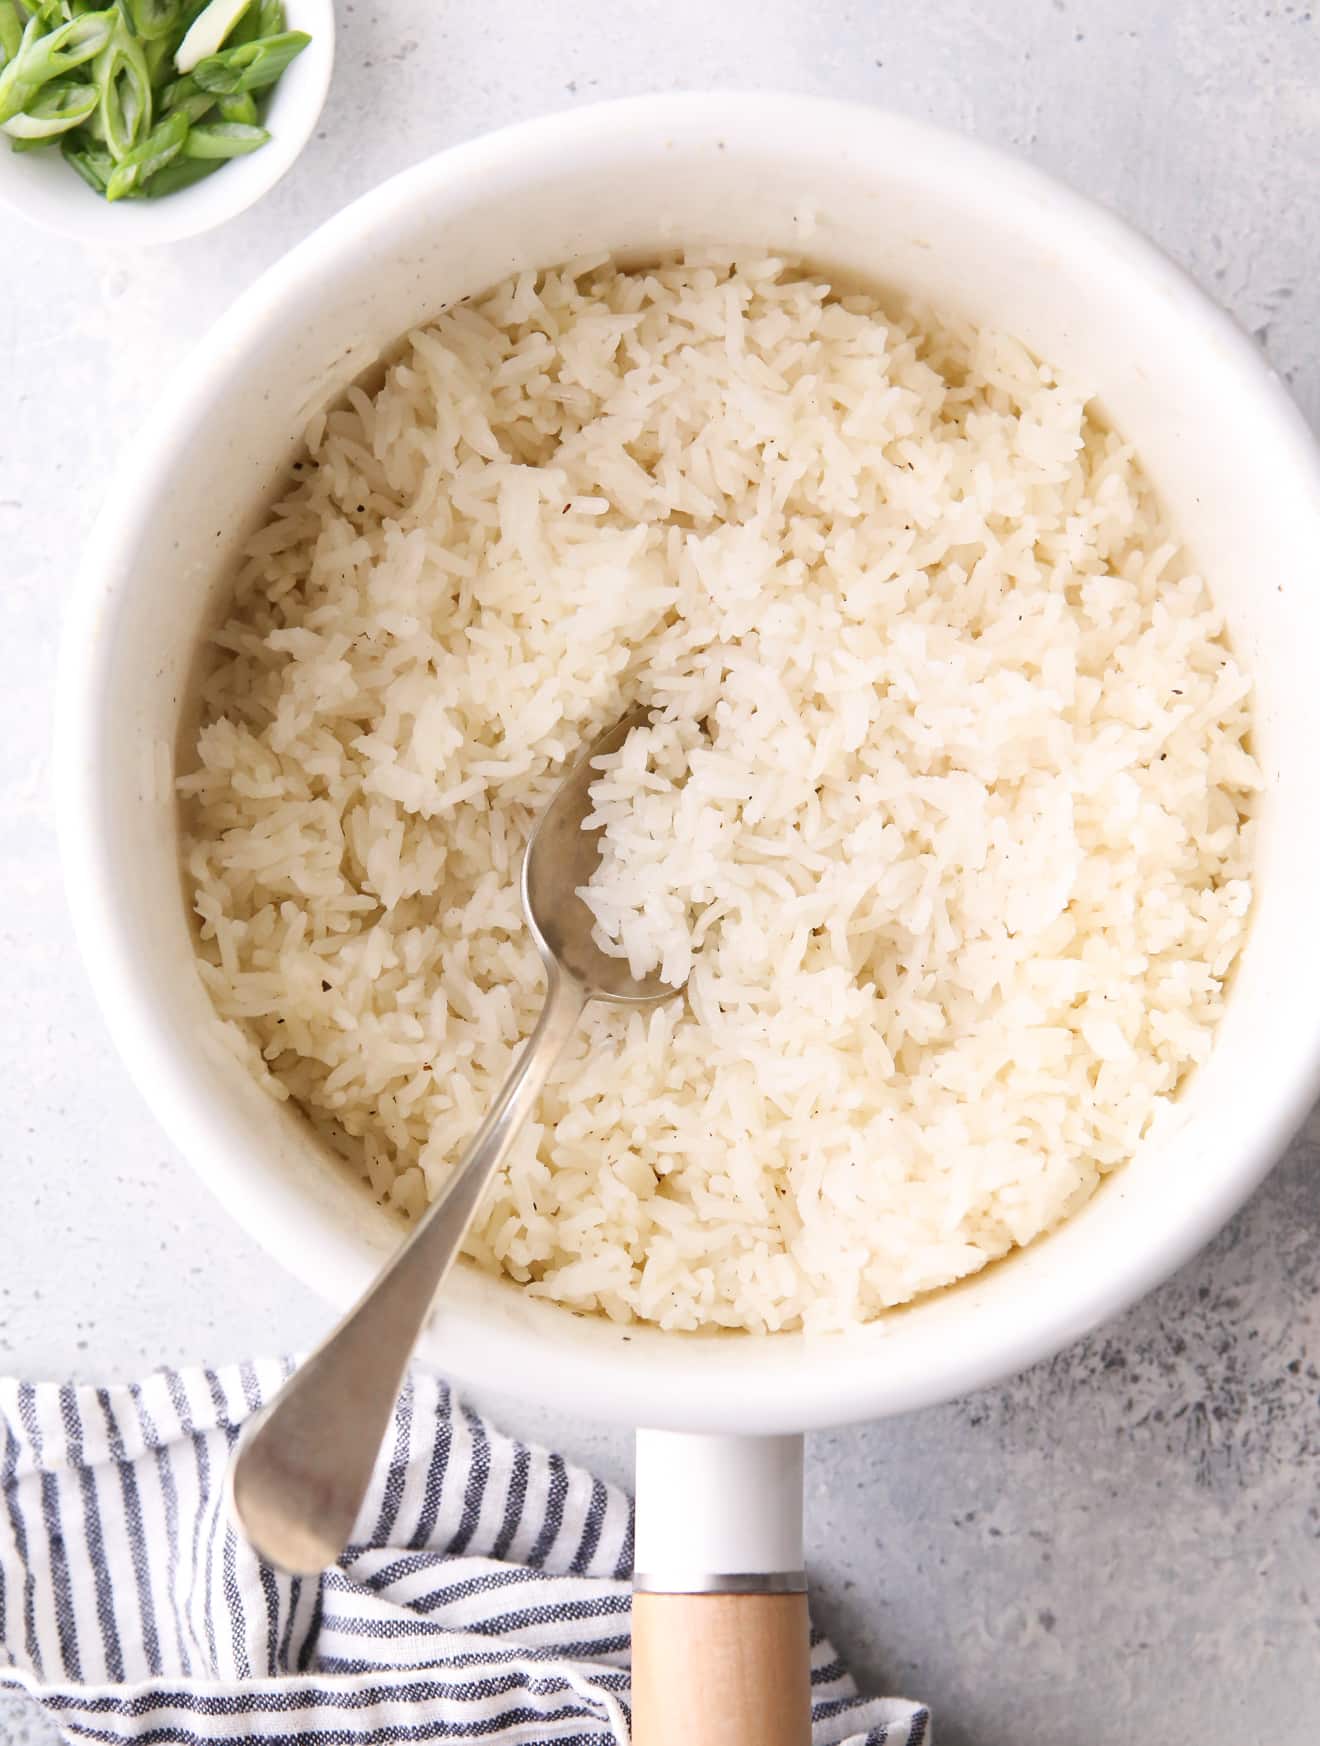 https://www.completelydelicious.com/wp-content/uploads/2021/01/perfect-steamed-rice-7.jpg